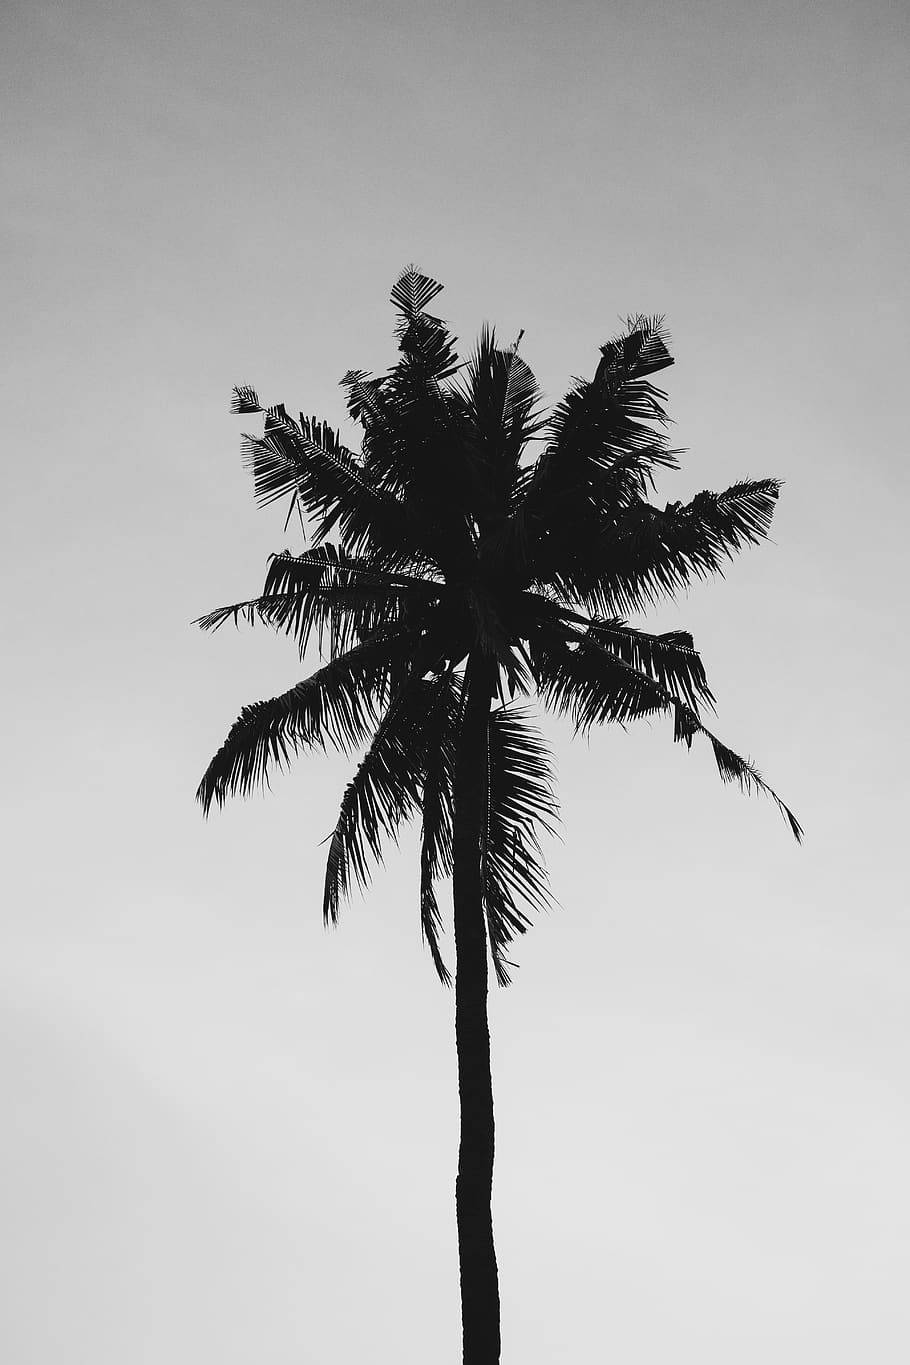 Black And White Solitary Coconut Tree Wallpaper